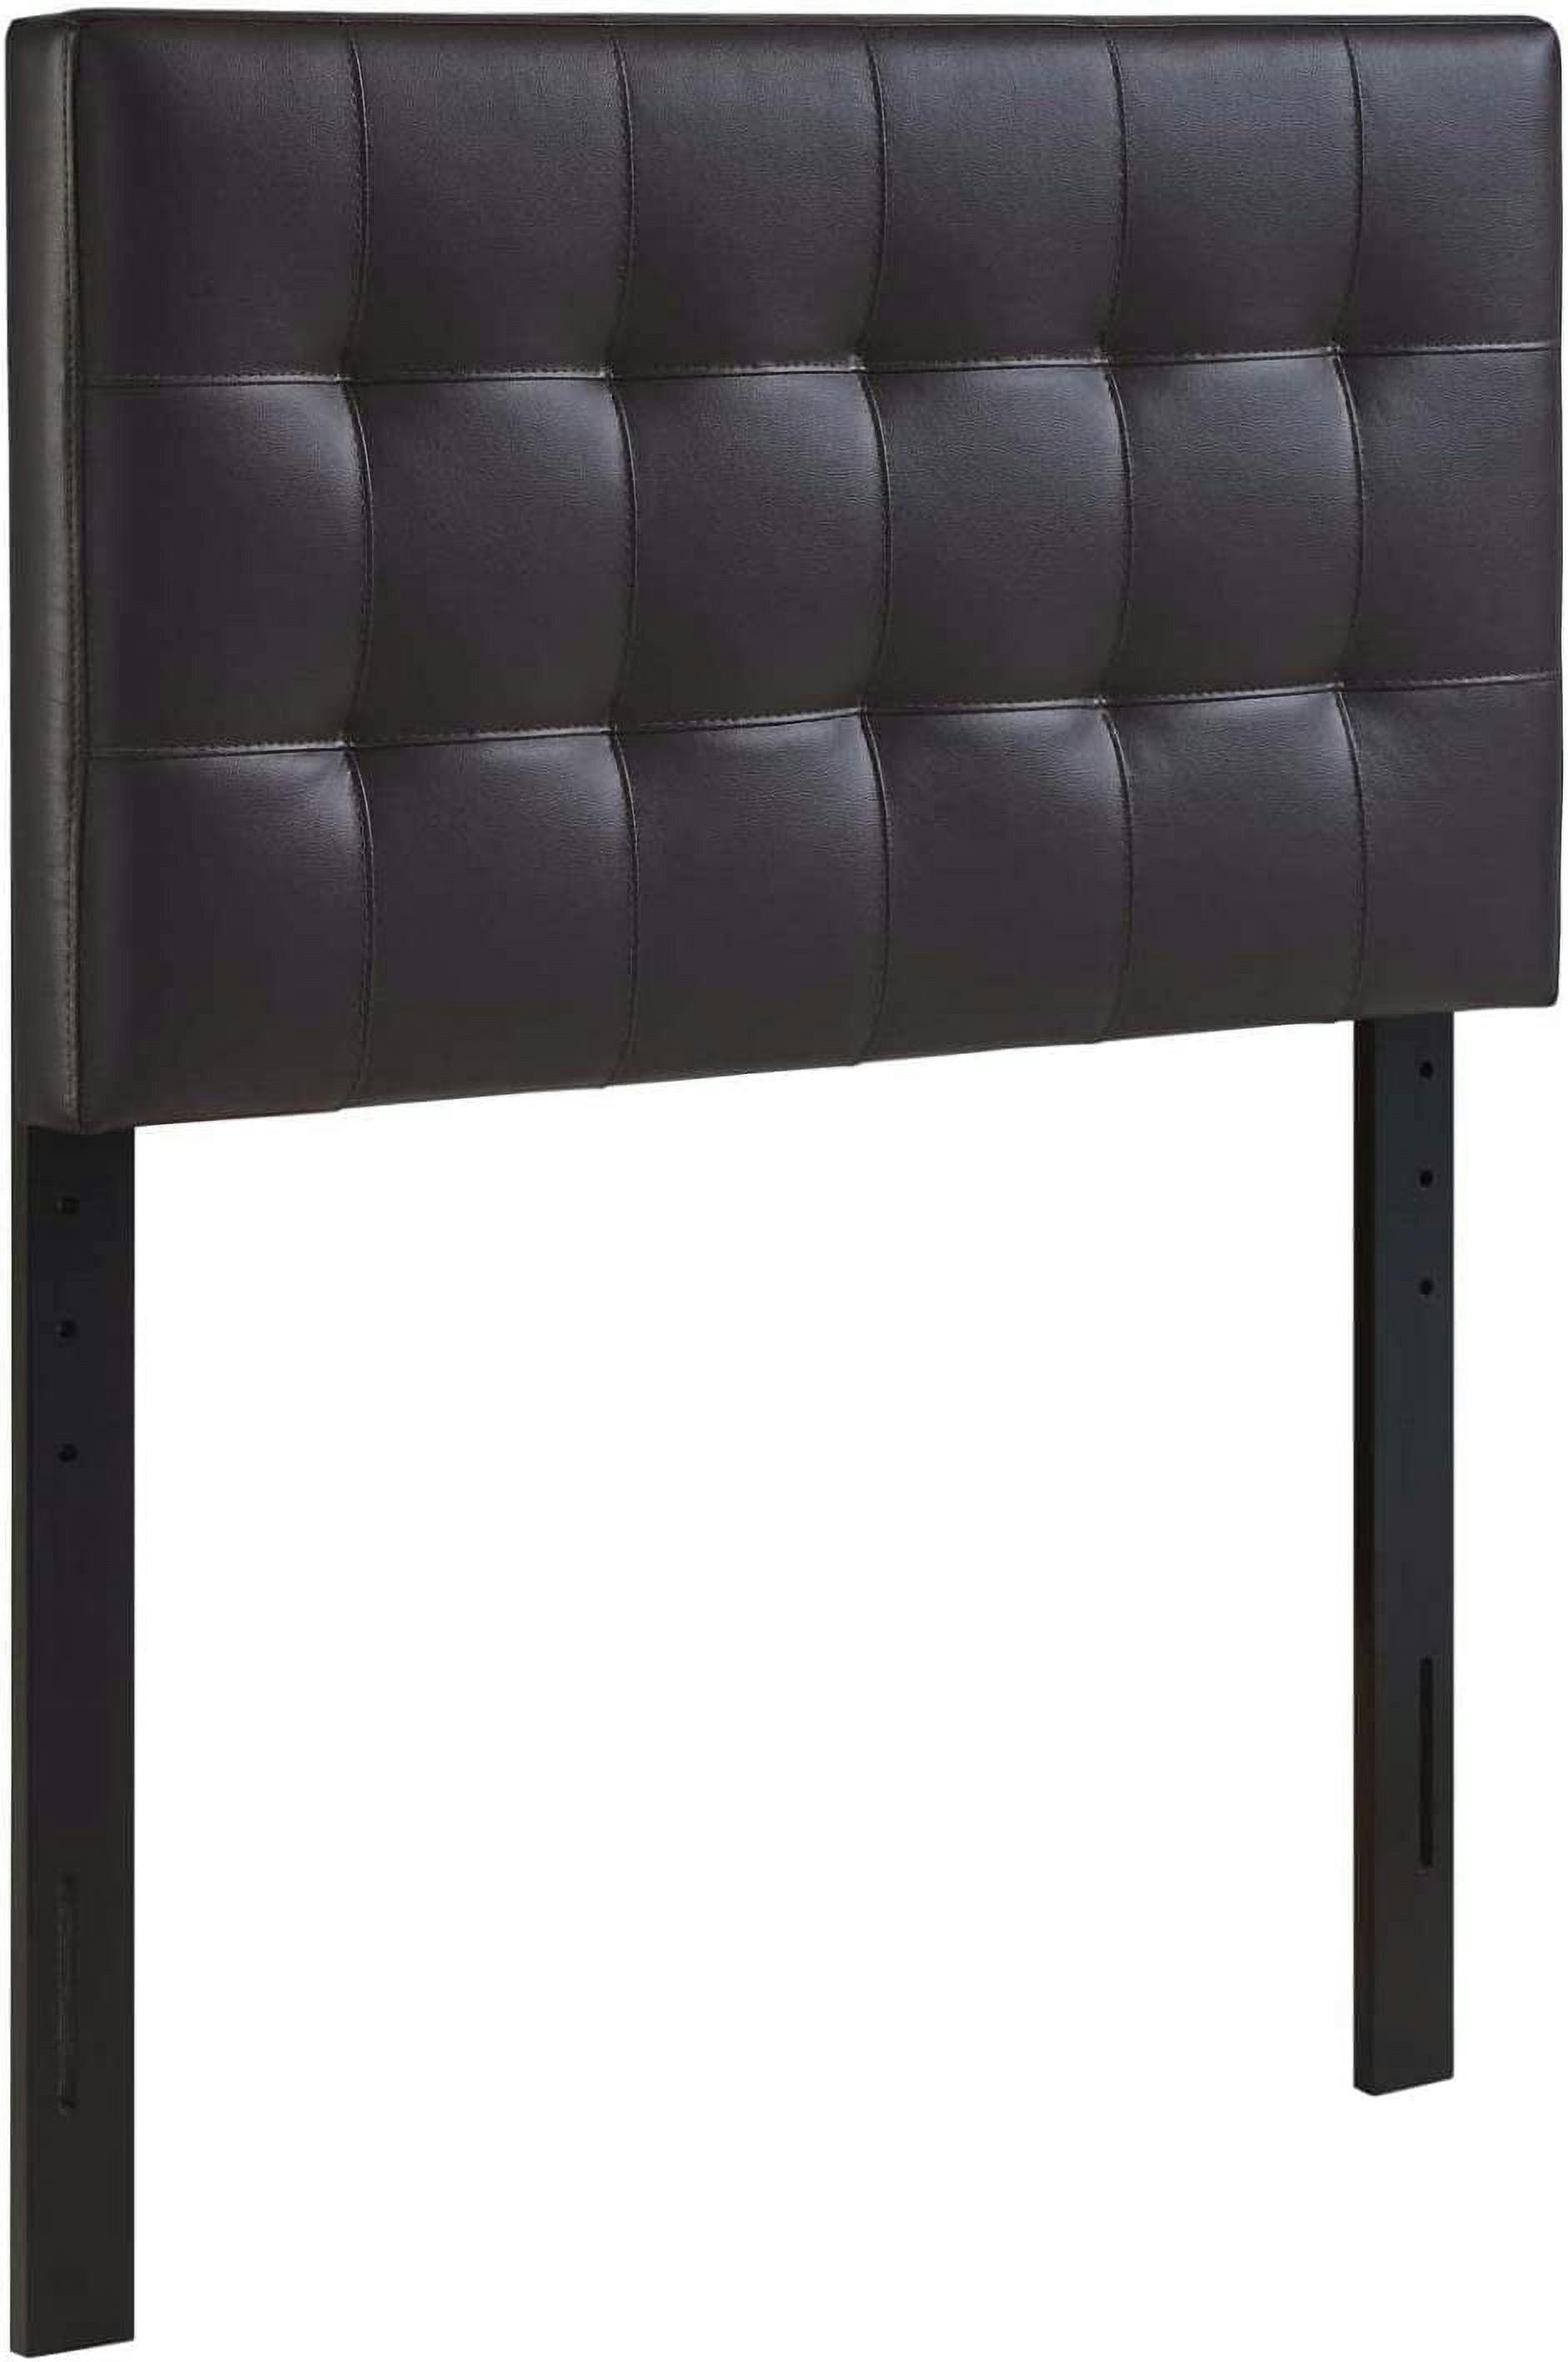 Lavish Lily Tufted Faux Leather Twin Headboard in Rich Brown